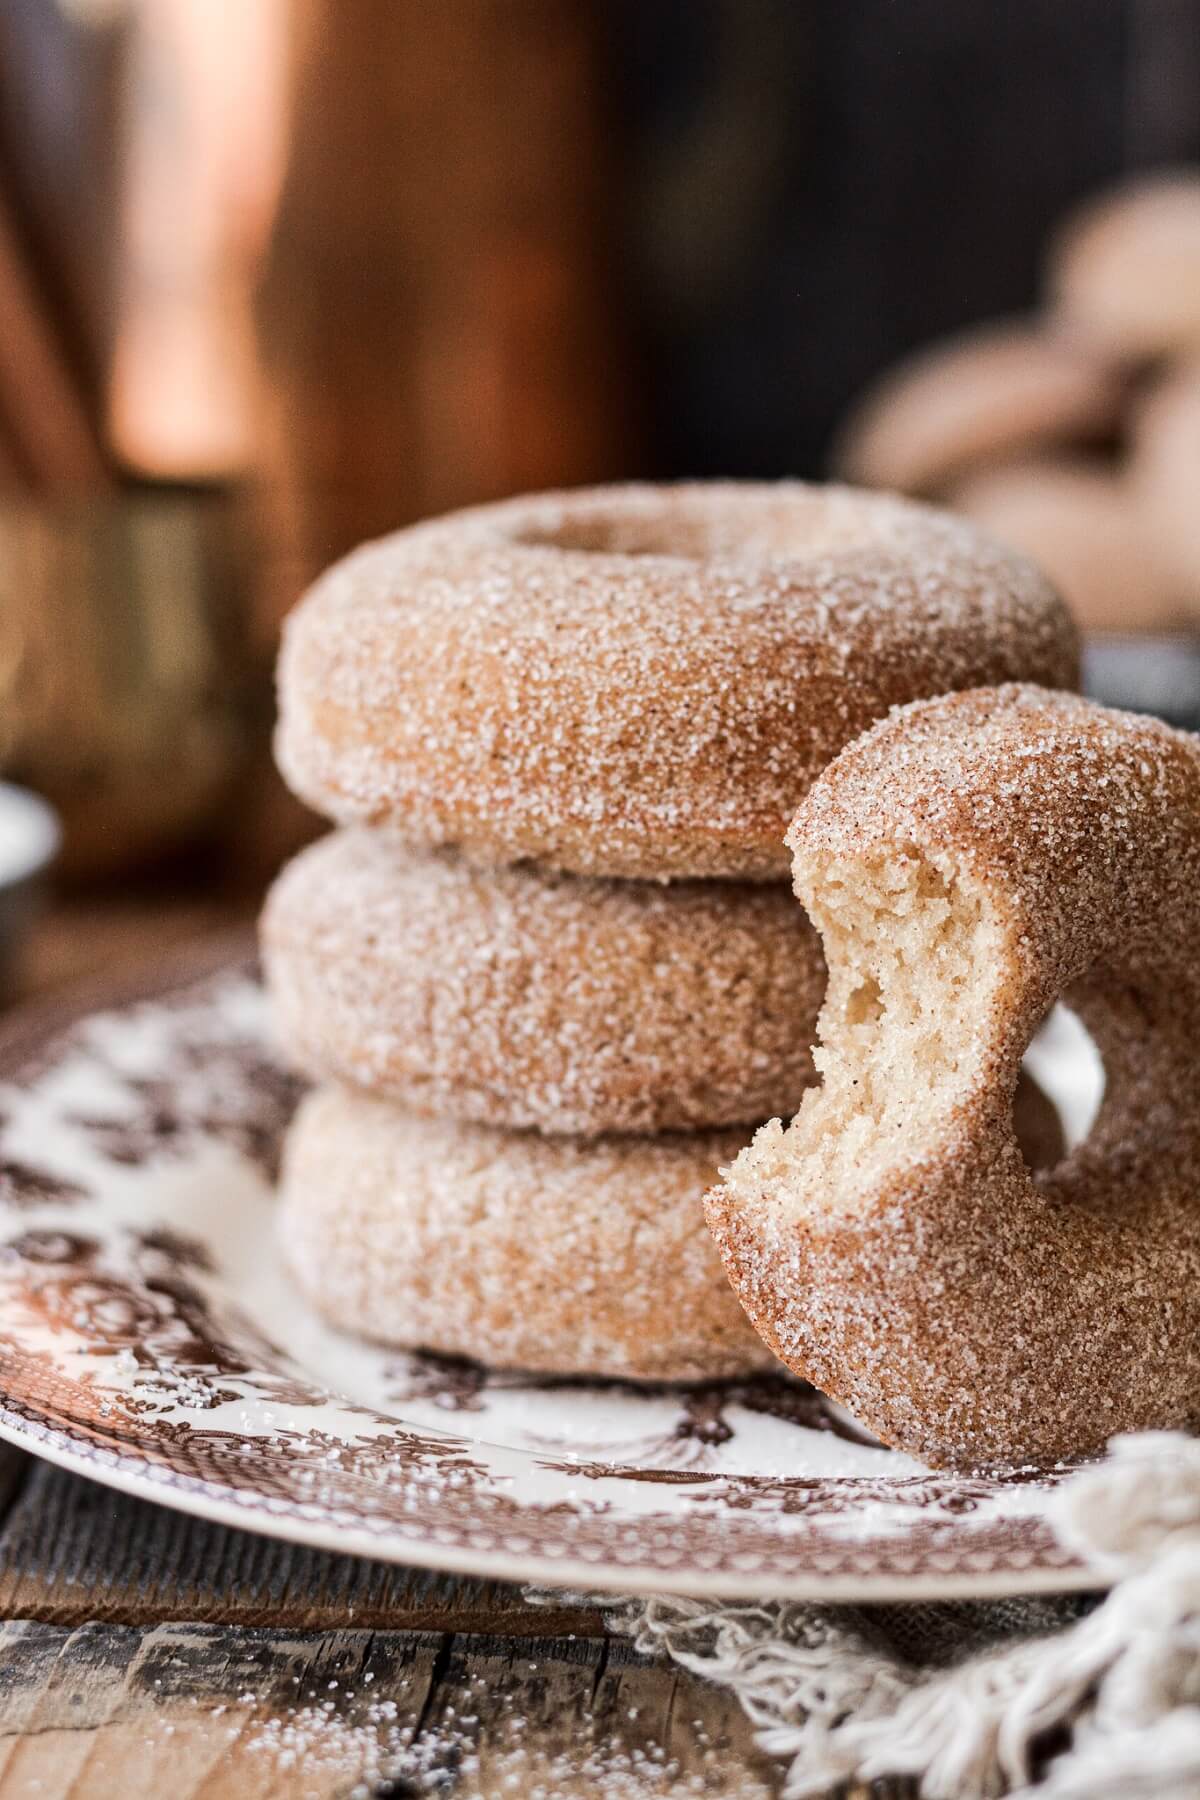 Cinnamon sugar donuts, one with a bite taken.